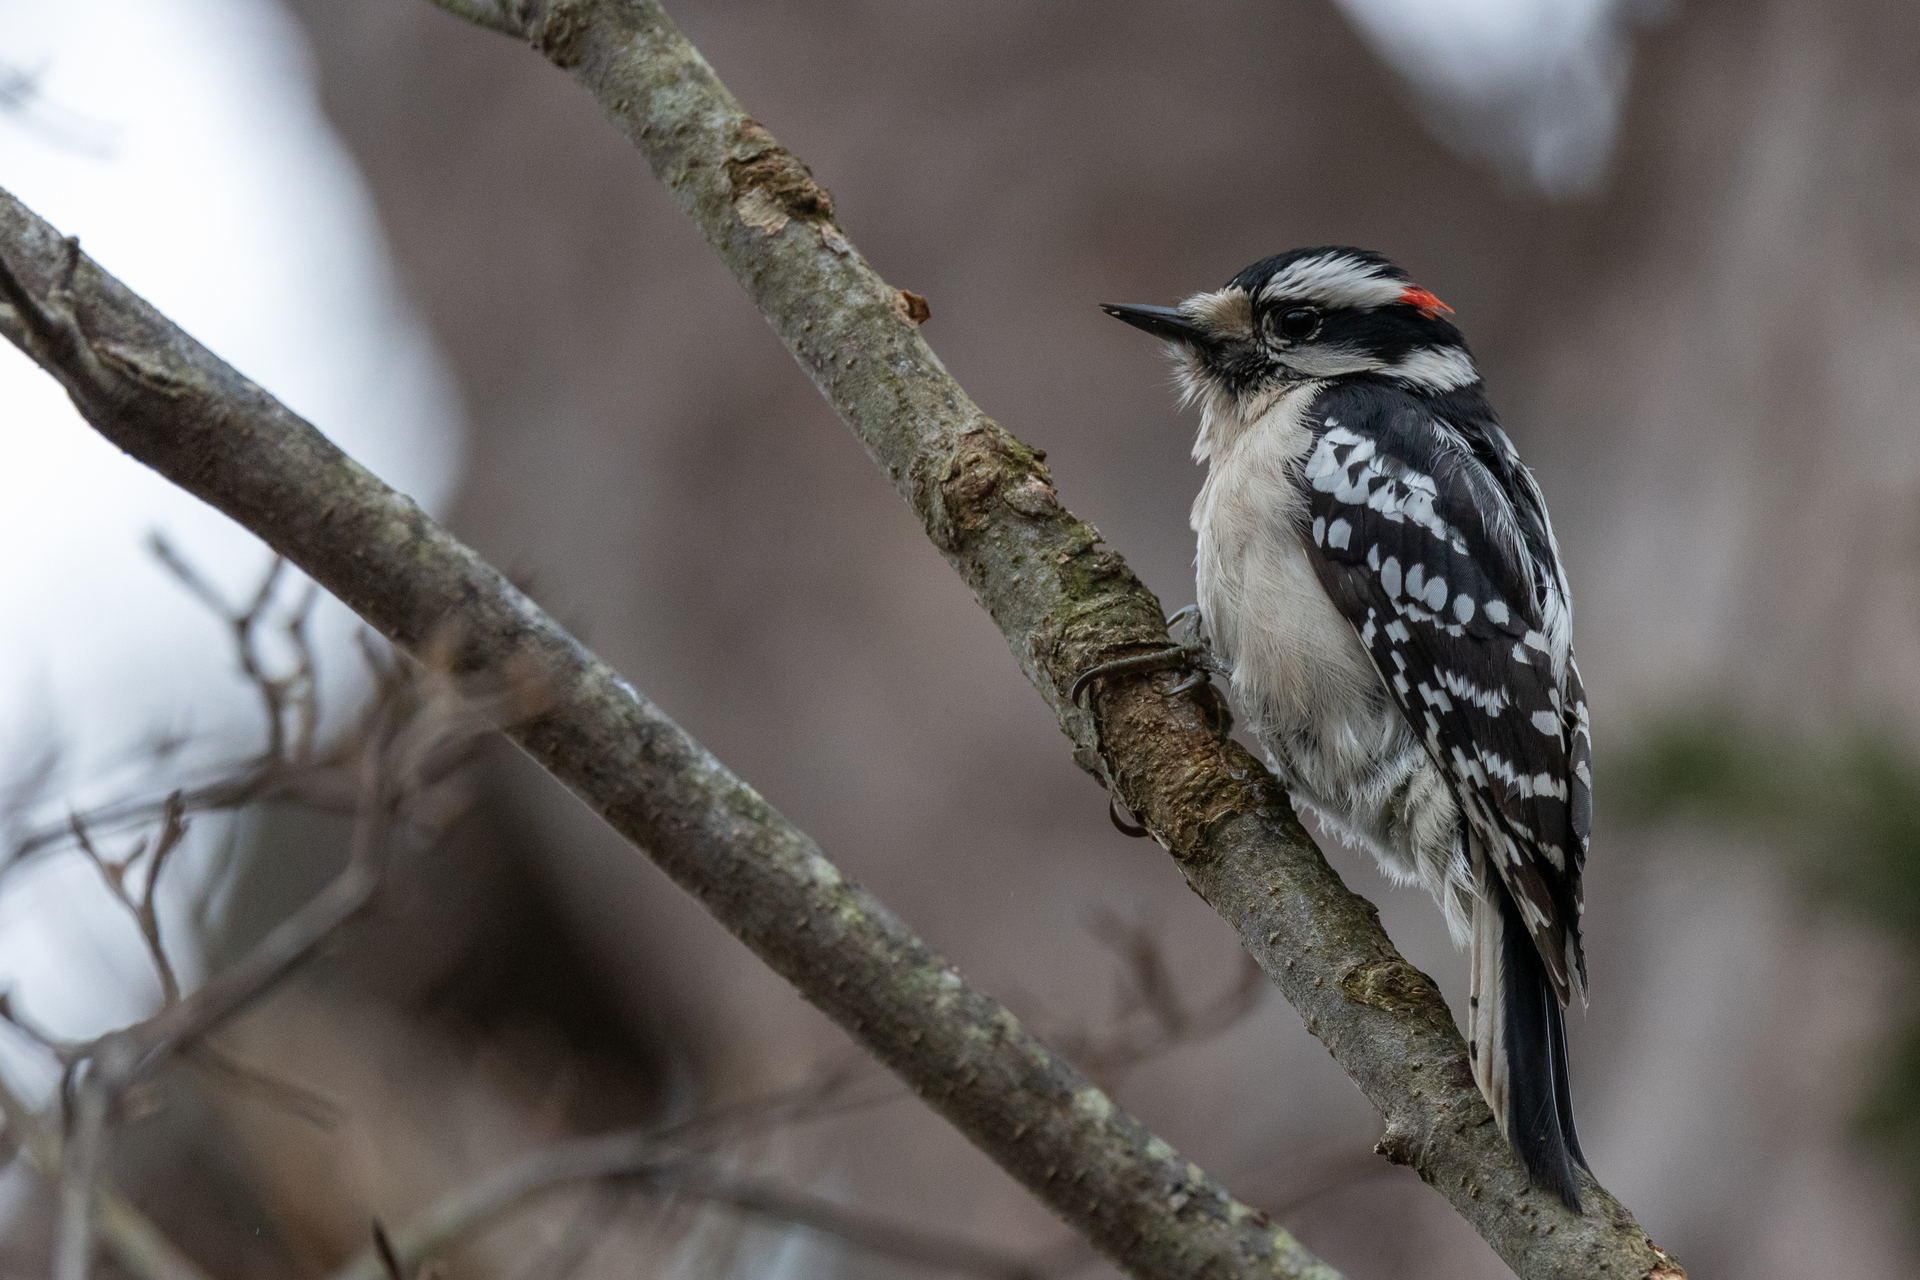 Downy Woodpecker perched on branch